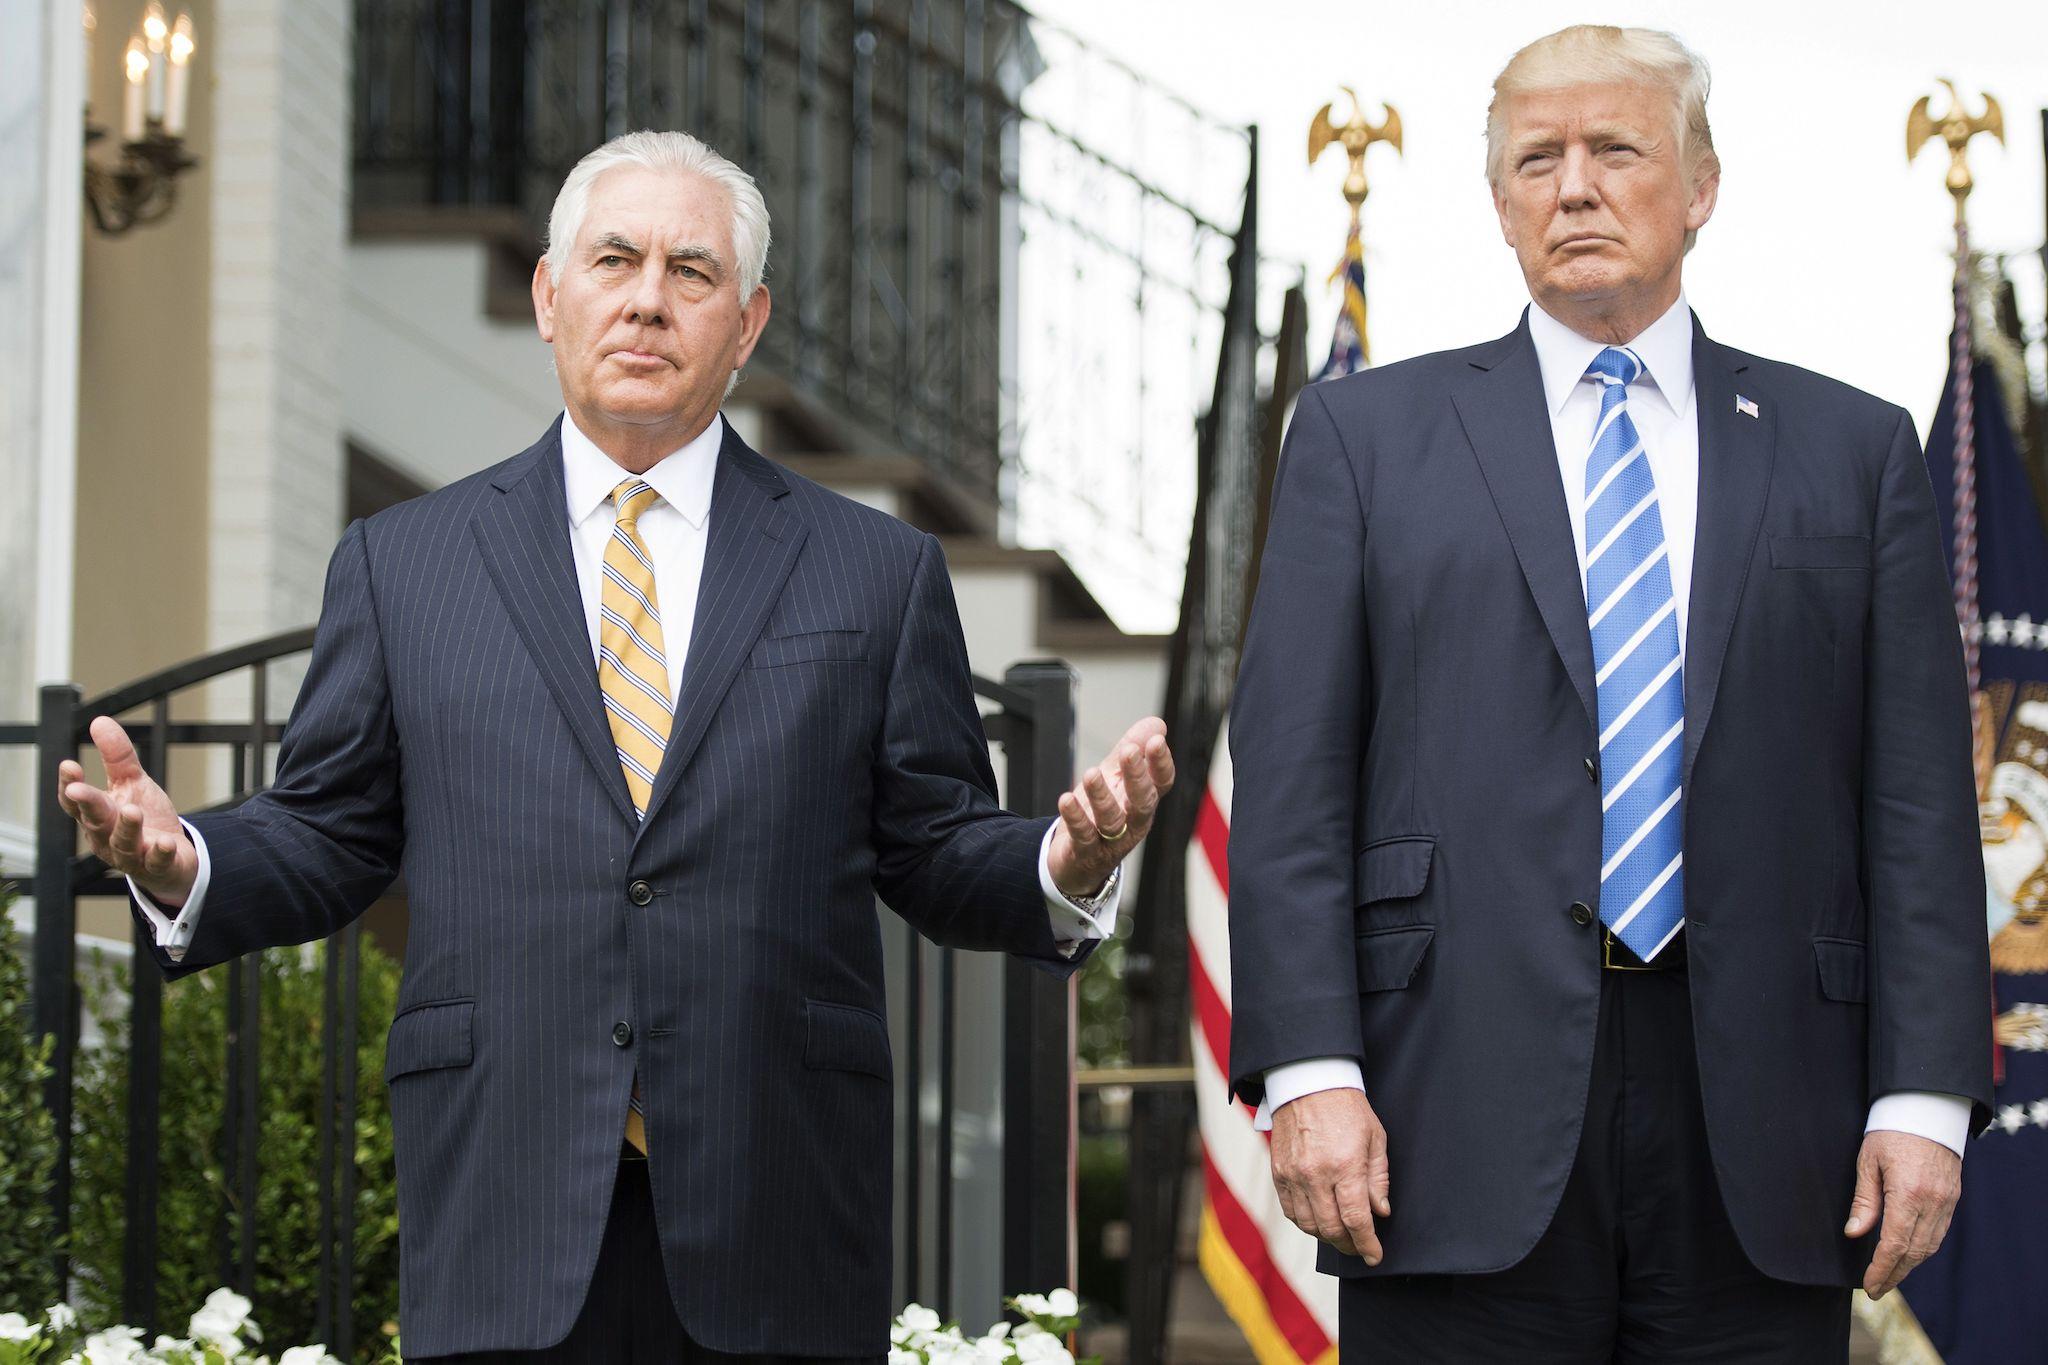 US President Donald Trump speaks to the press with US Secretary of State Rex Tillerson on August 11, 2017, at Trump National Golf Club in Bedminster, New Jersey.